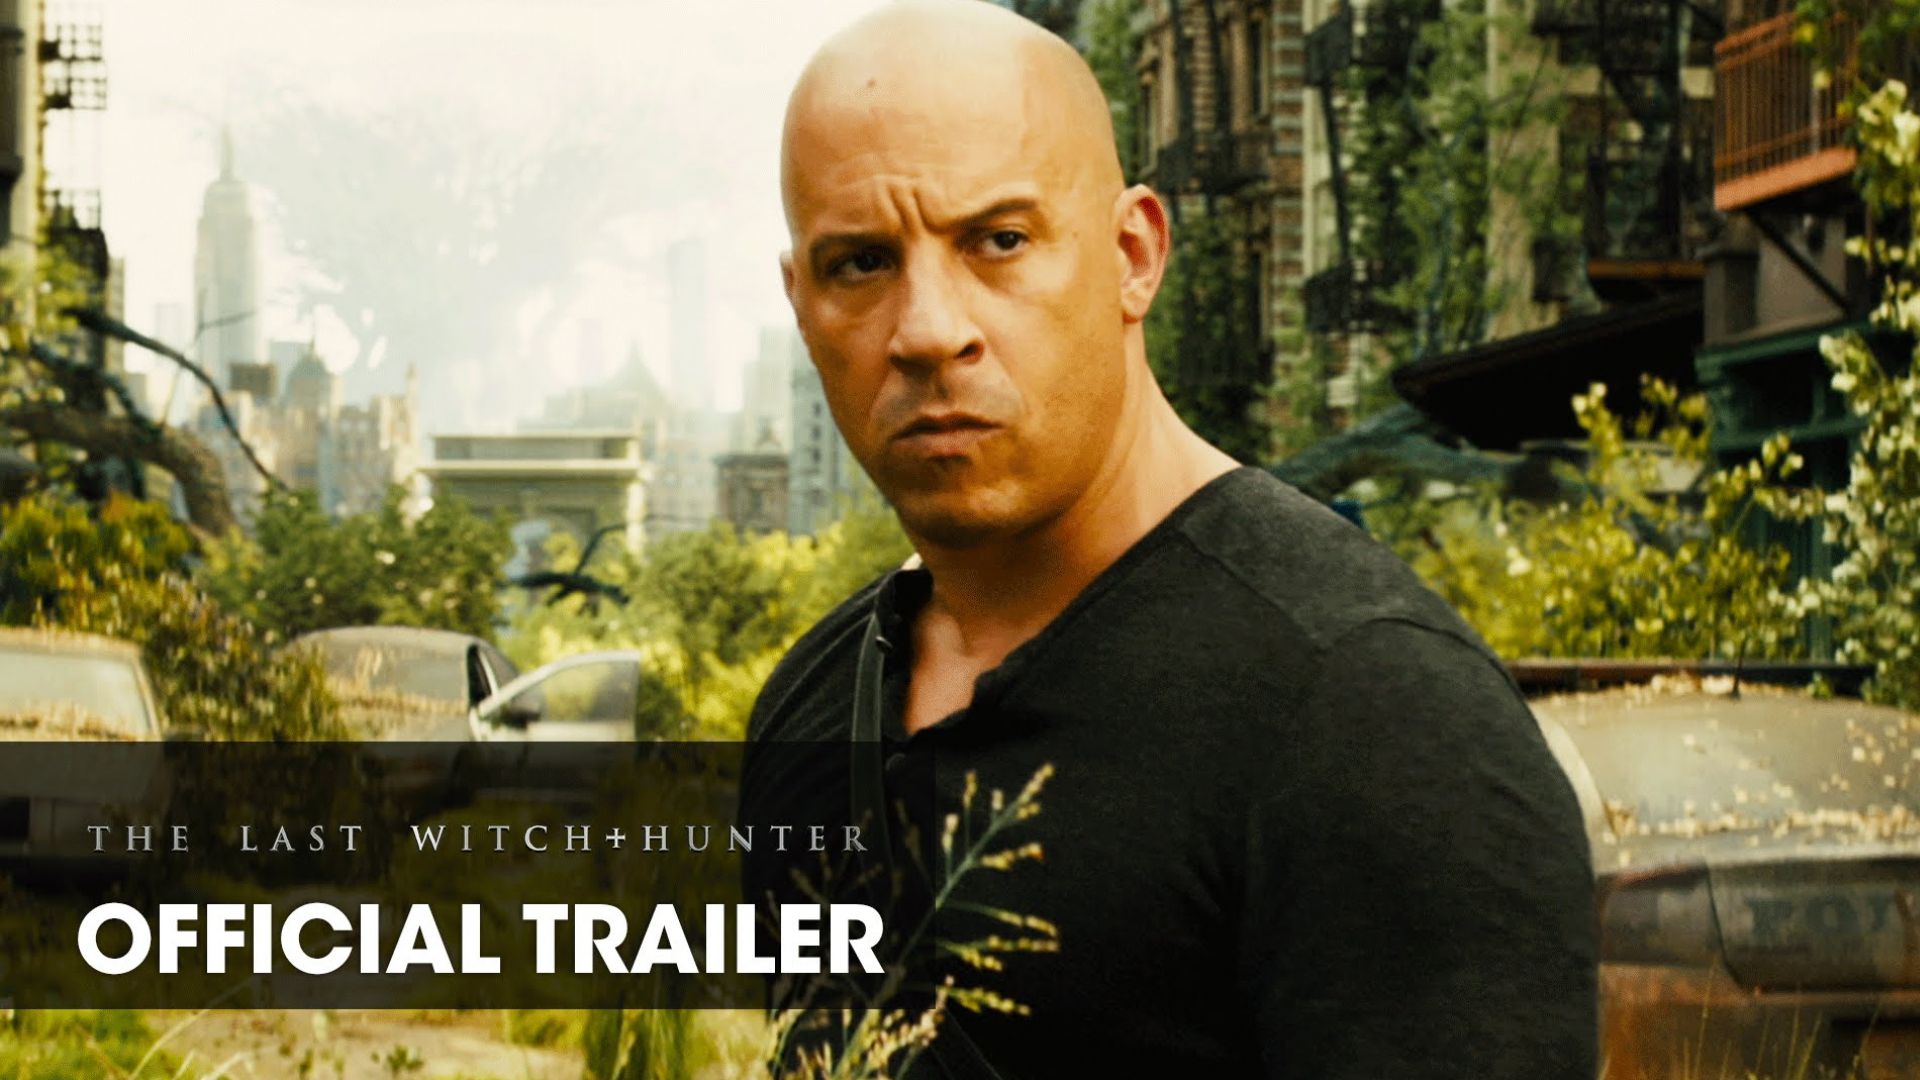 The Last Witch Hunter  Vin Diesel NEW Official Trailer – "